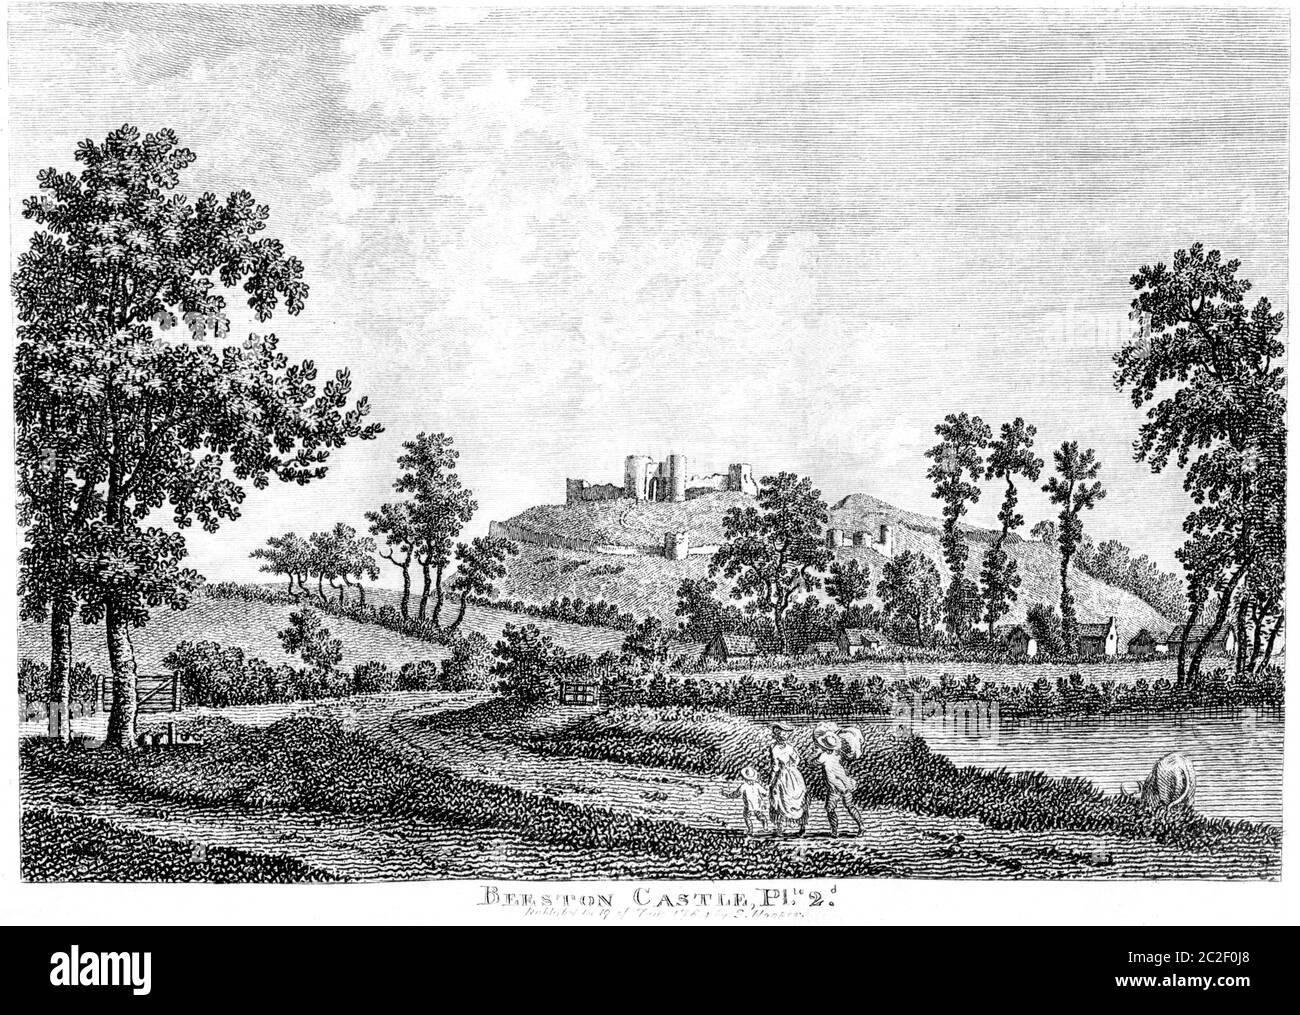 An engraving of Beeston Castle Cheshire 19 June 1784 scanned at high resolution from a book published in the 1780s. Believed copyright free. Stock Photo